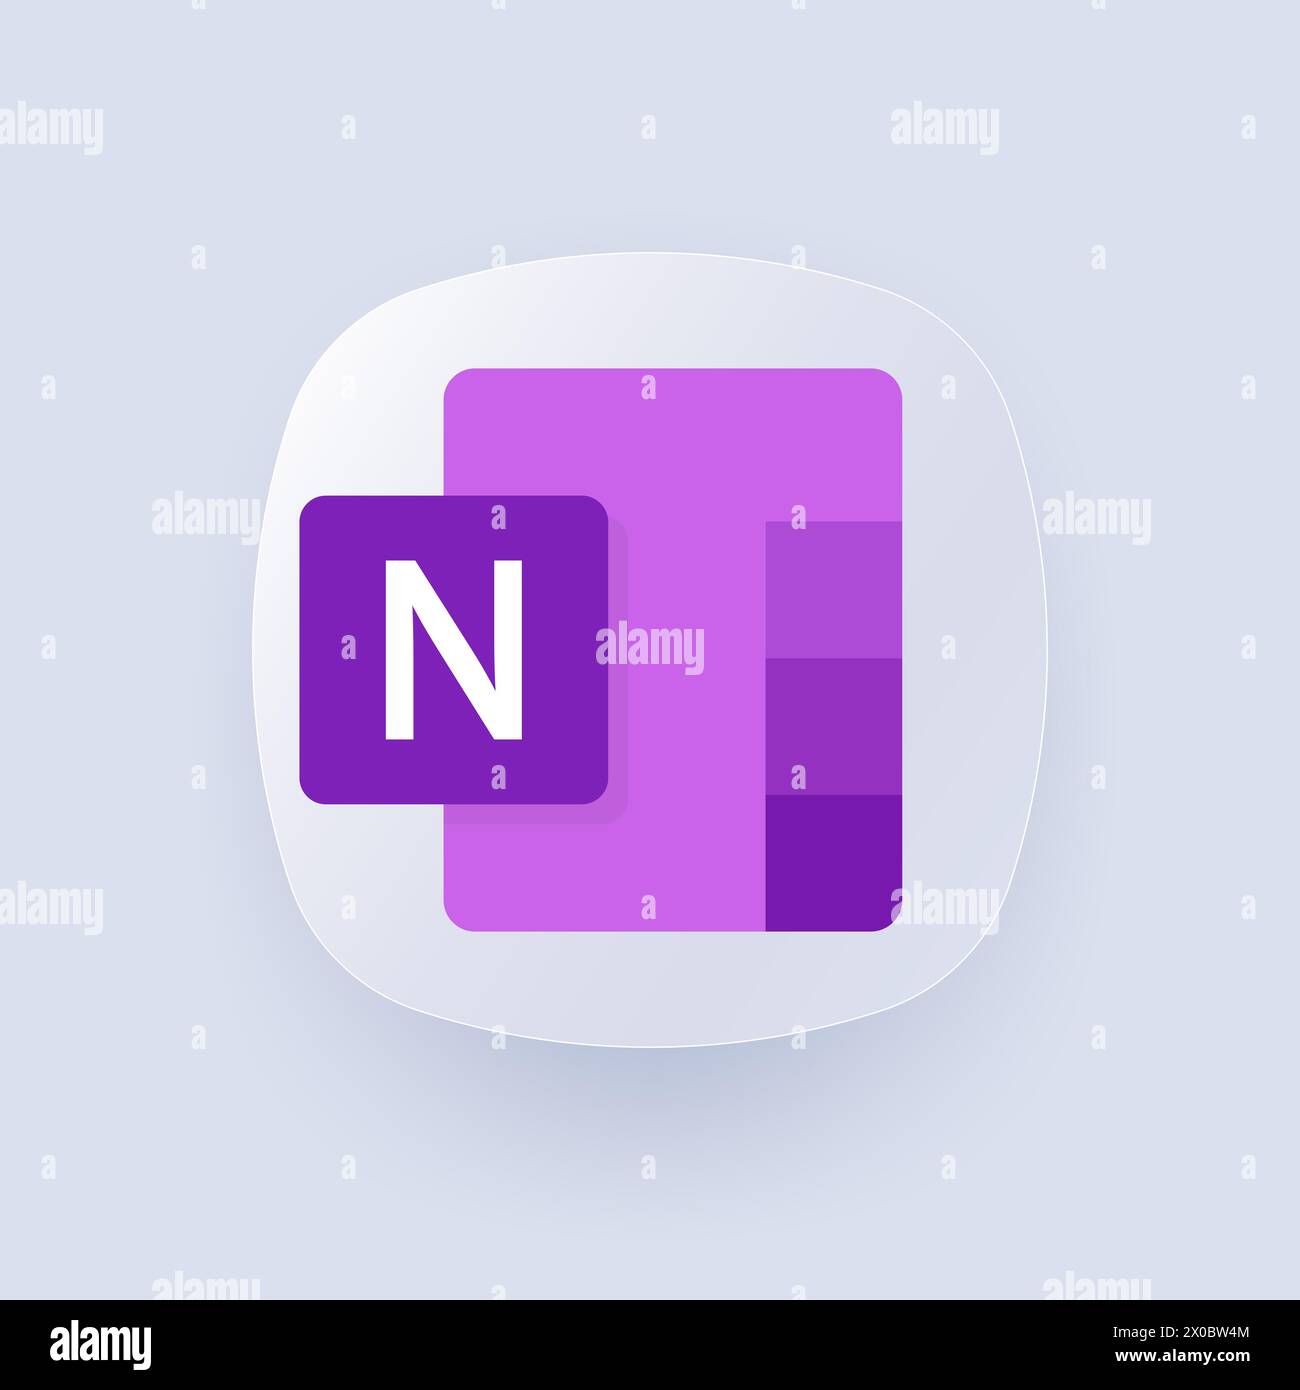 Microsoft OneNote logo. Program for creating quick notes and organizing personal information. Microsoft Office 365 logotype. Microsoft Corporation. So Stock Vector